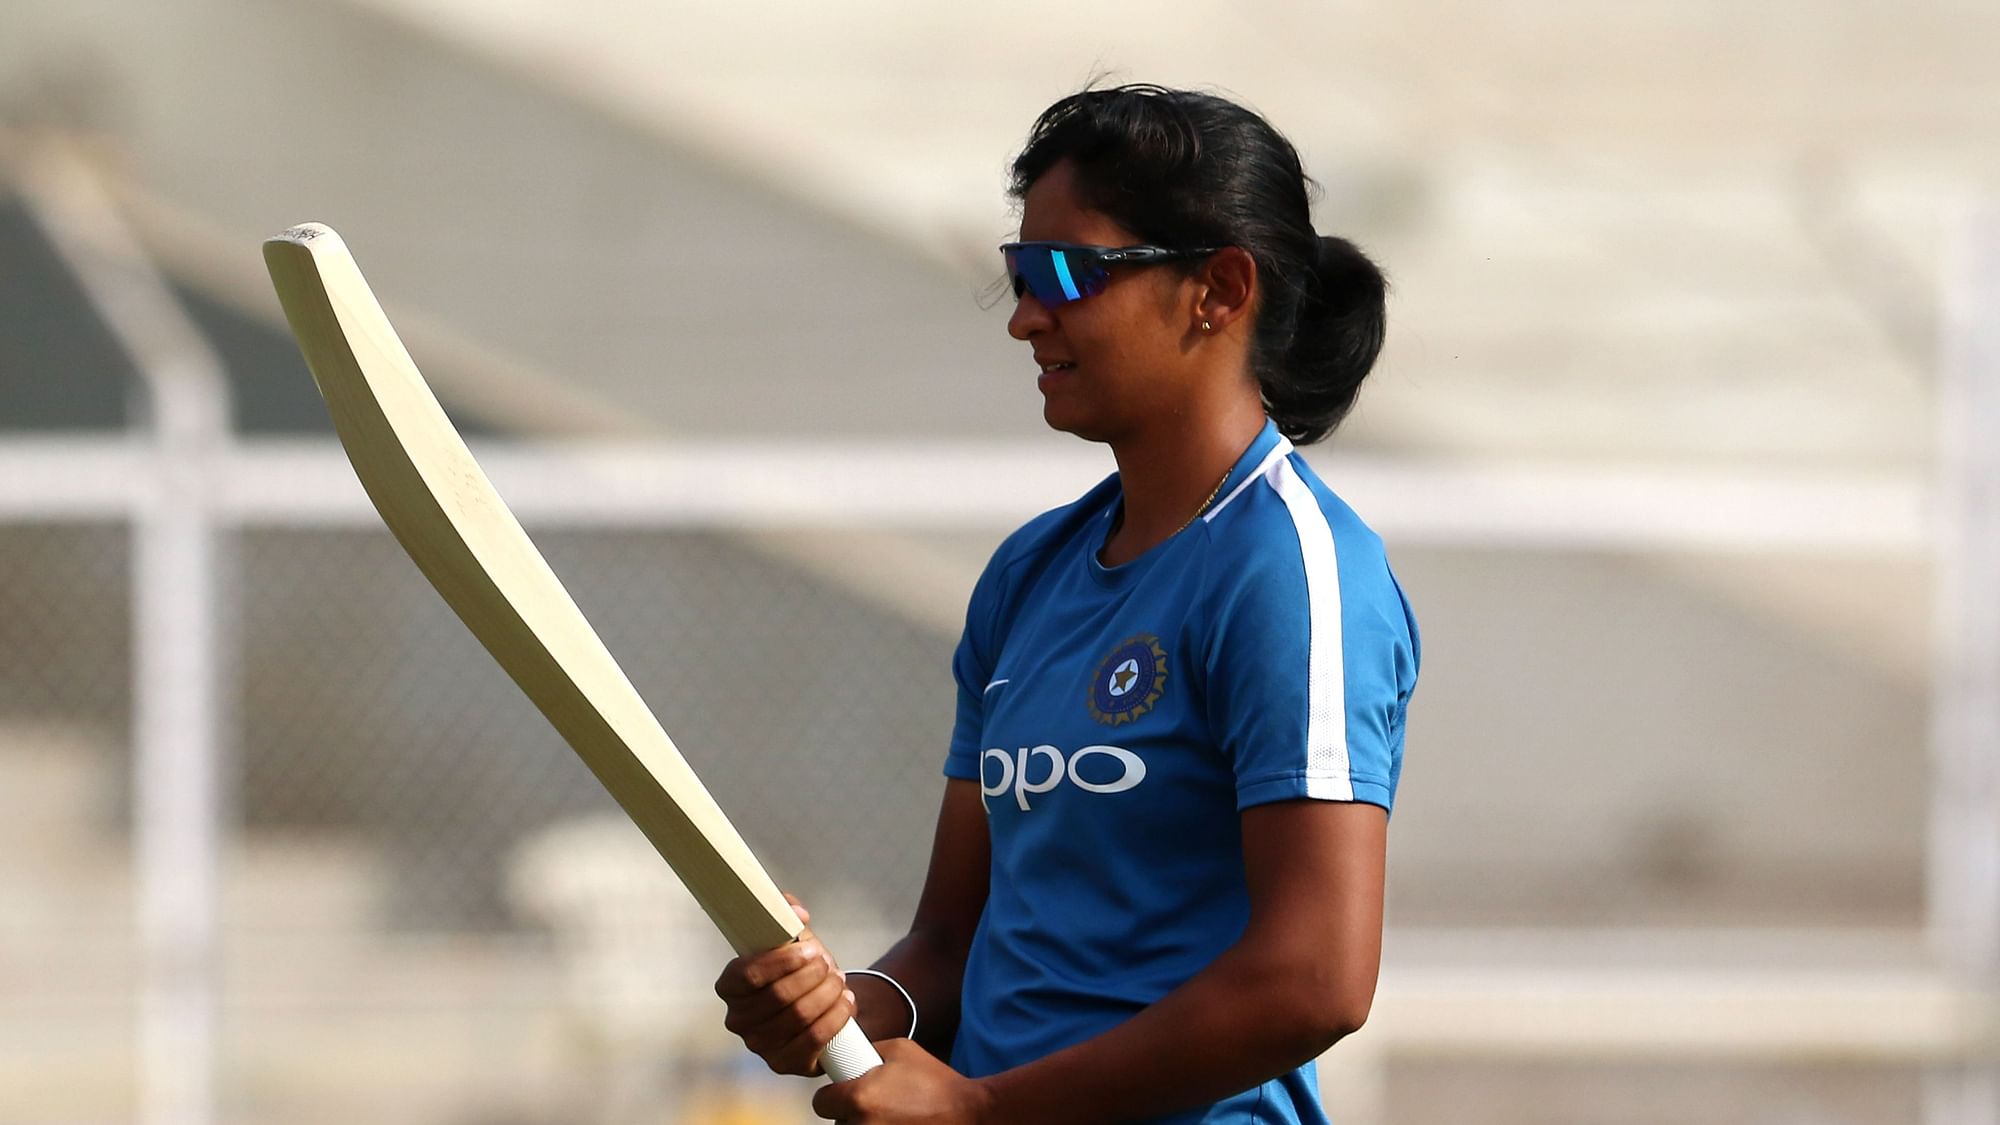 The Indian women’s team spoke to Ajinkya Rahane ahead of their Test match against England that starts on 16 June.